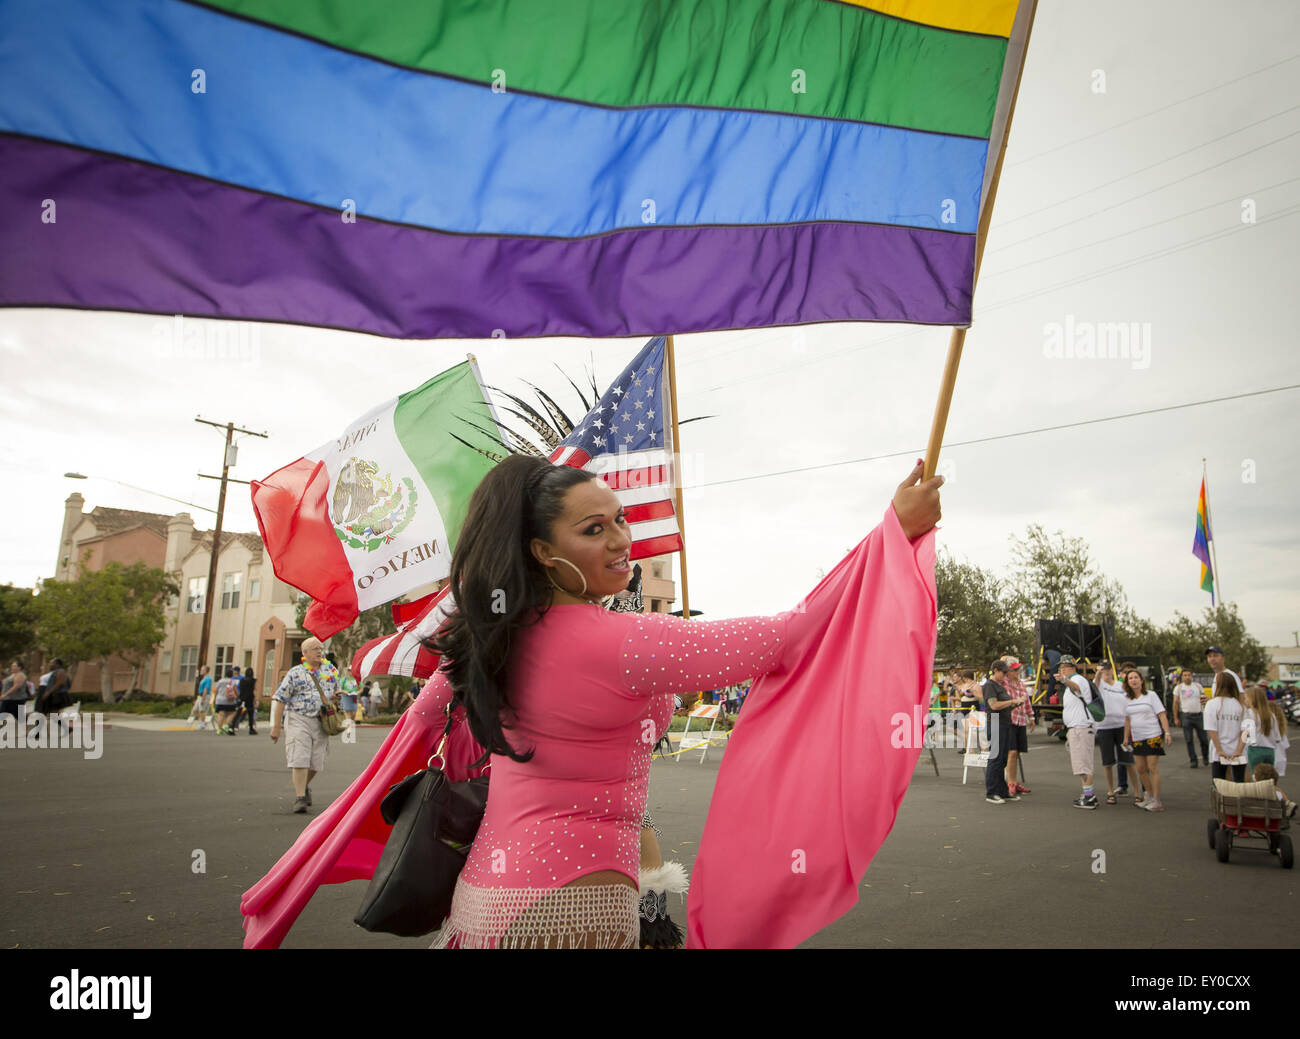 San Diego, California, USA. 18th July, 2015. July 18, 2015 - San Diego, CA, U.S. - | Parade participants carry Mexico, U.S. and Pride flags as they make their way to the parade. Rain dampened the San Diego LGBT Pride Parade Saturday, if not the spirit of the participants. | San Diego Union-Tribune photo by David Poller © David Poller/ZUMA Wire/Alamy Live News Stock Photo